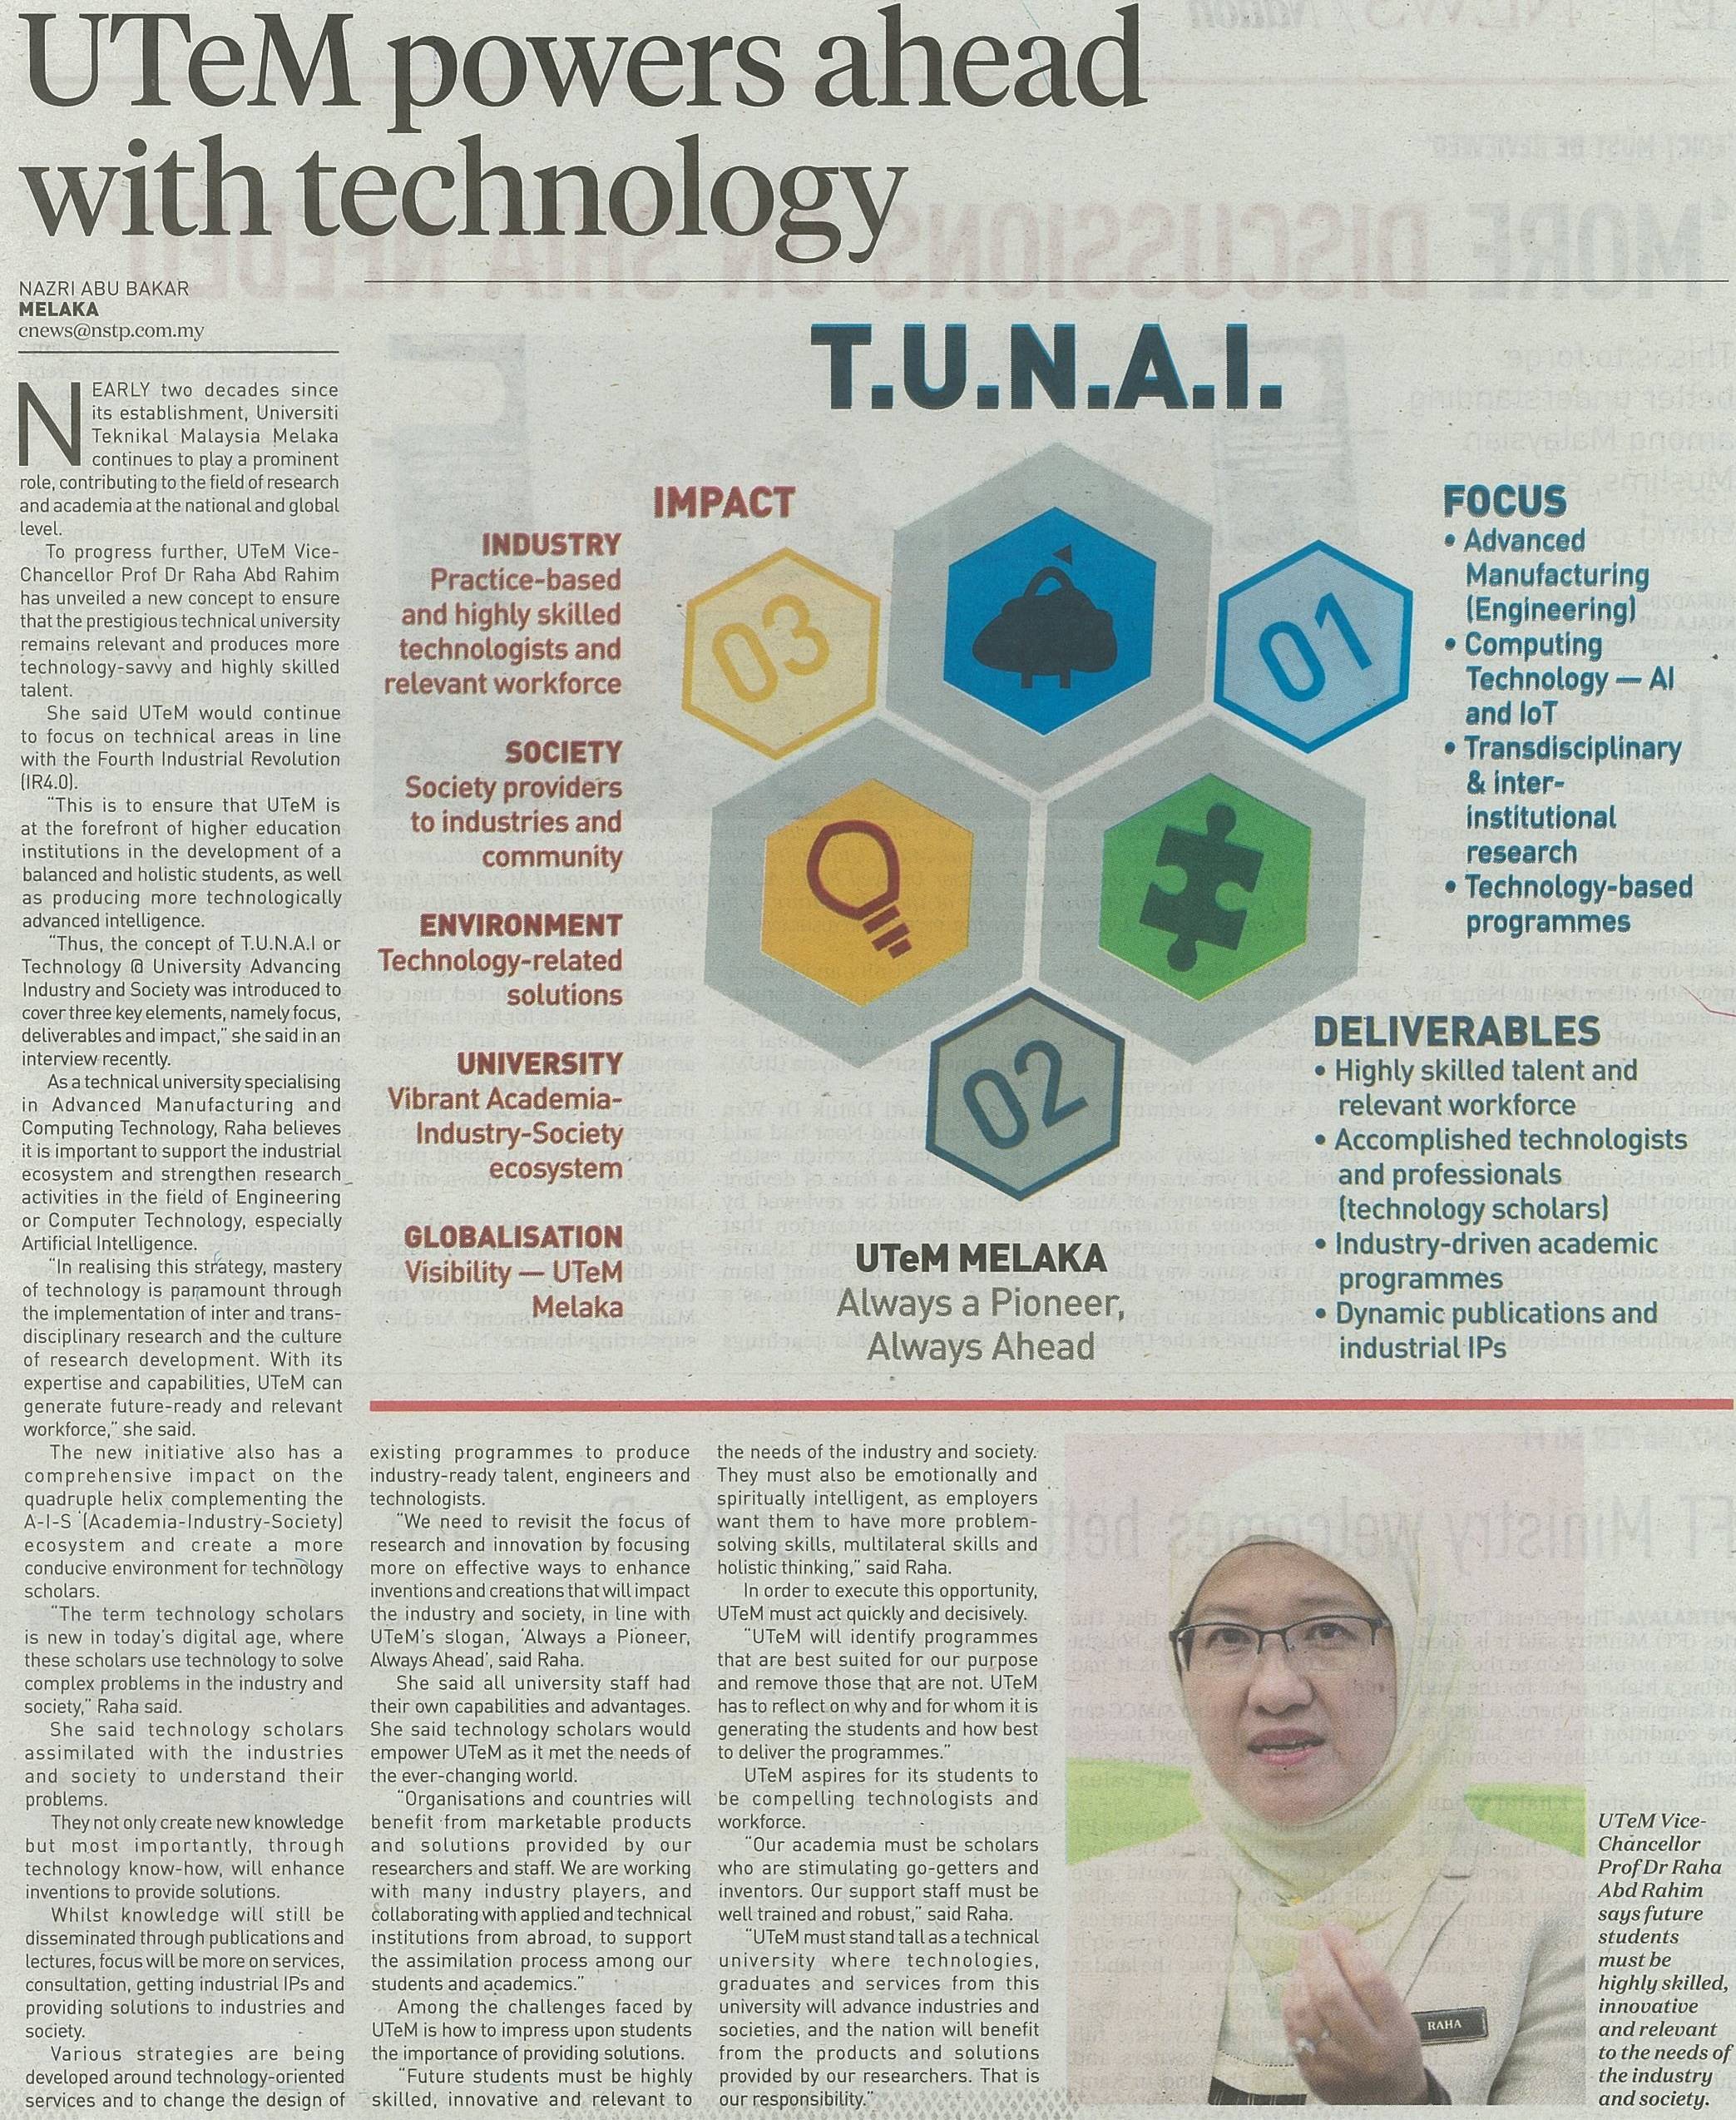 UTeM powers ahead with technology